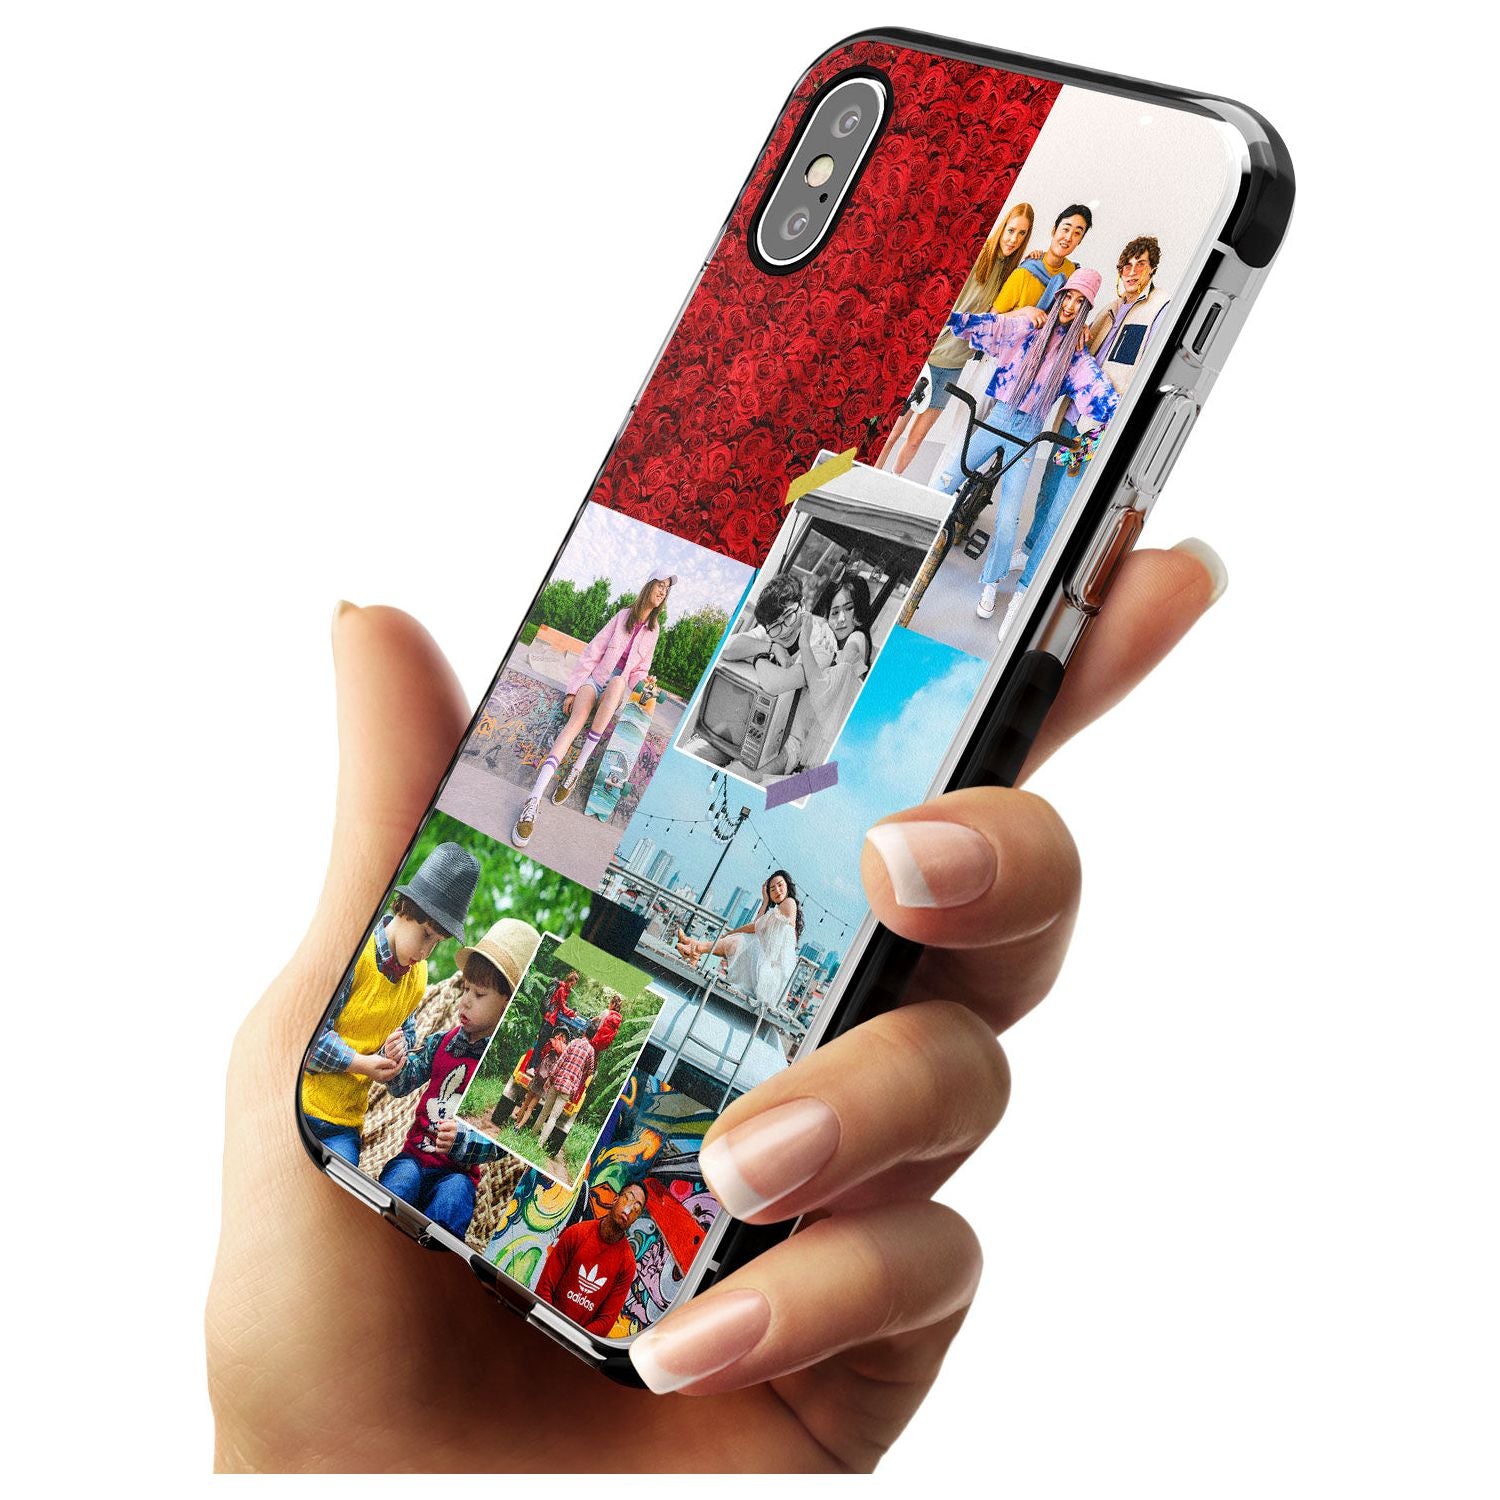 Personalised Photo Collage Black Impact Phone Case for iPhone X XS Max XR